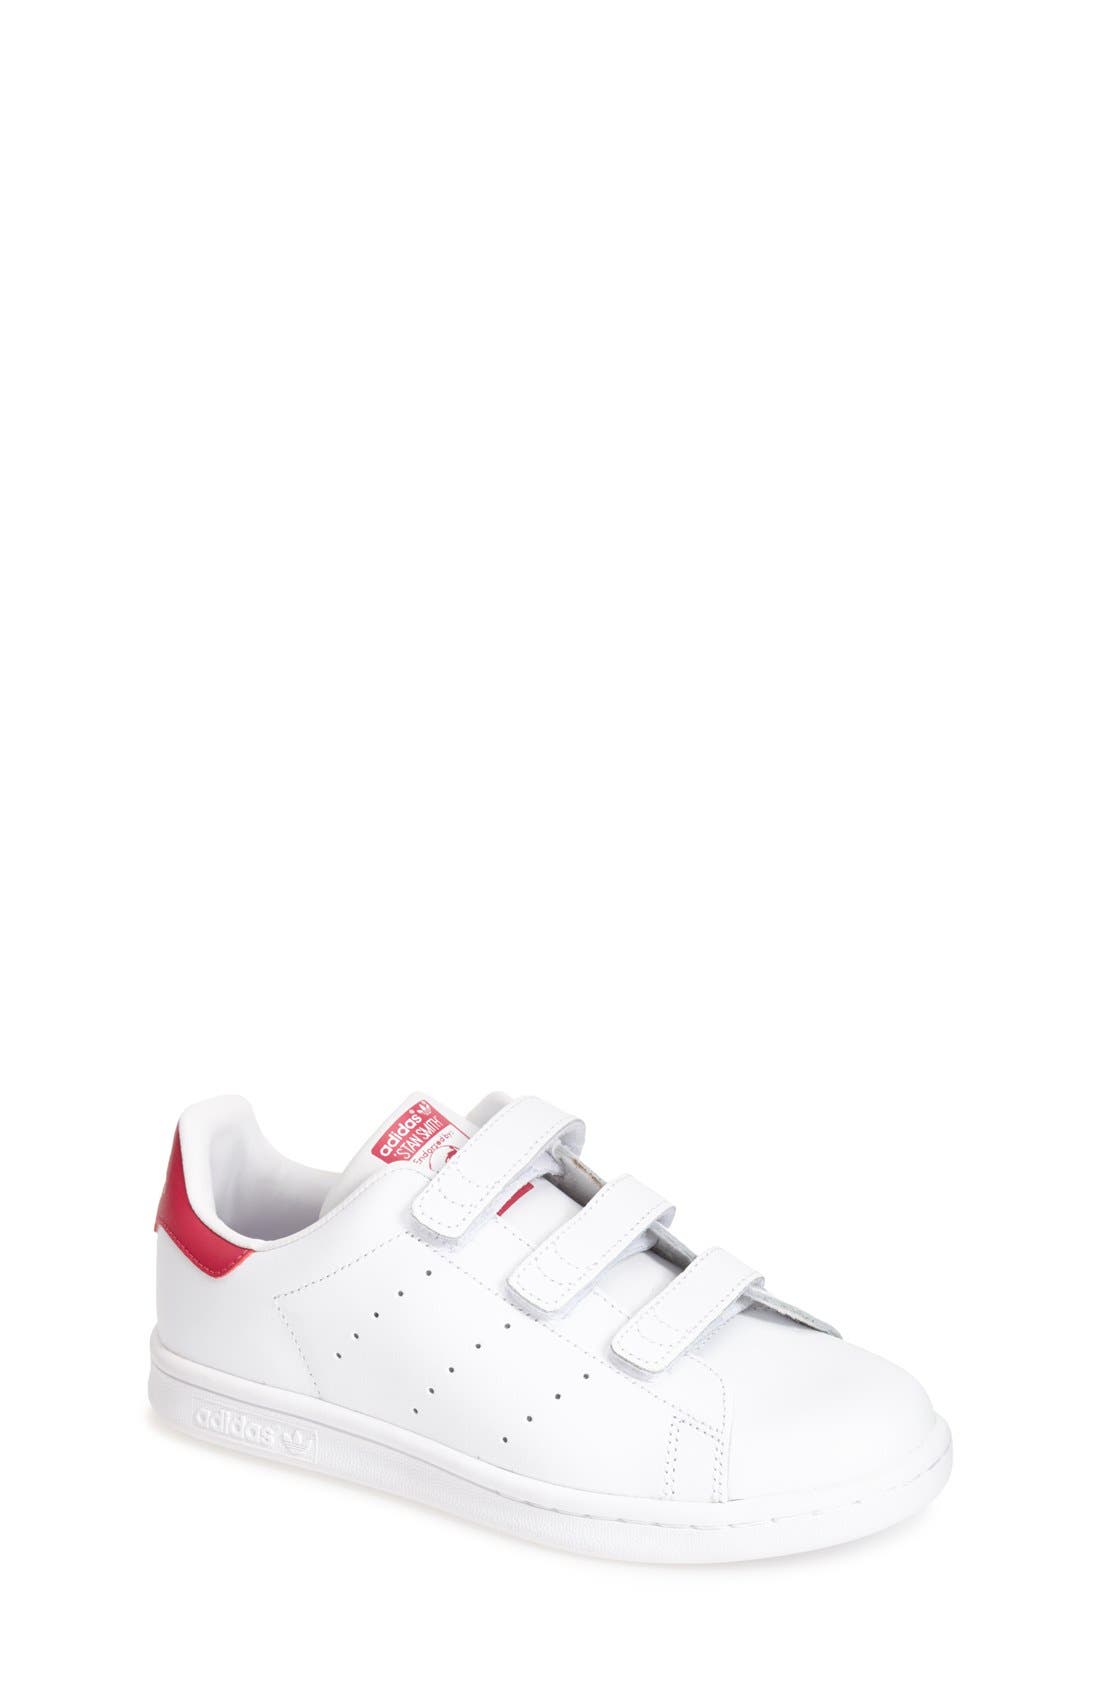 adidas cmf sneakers